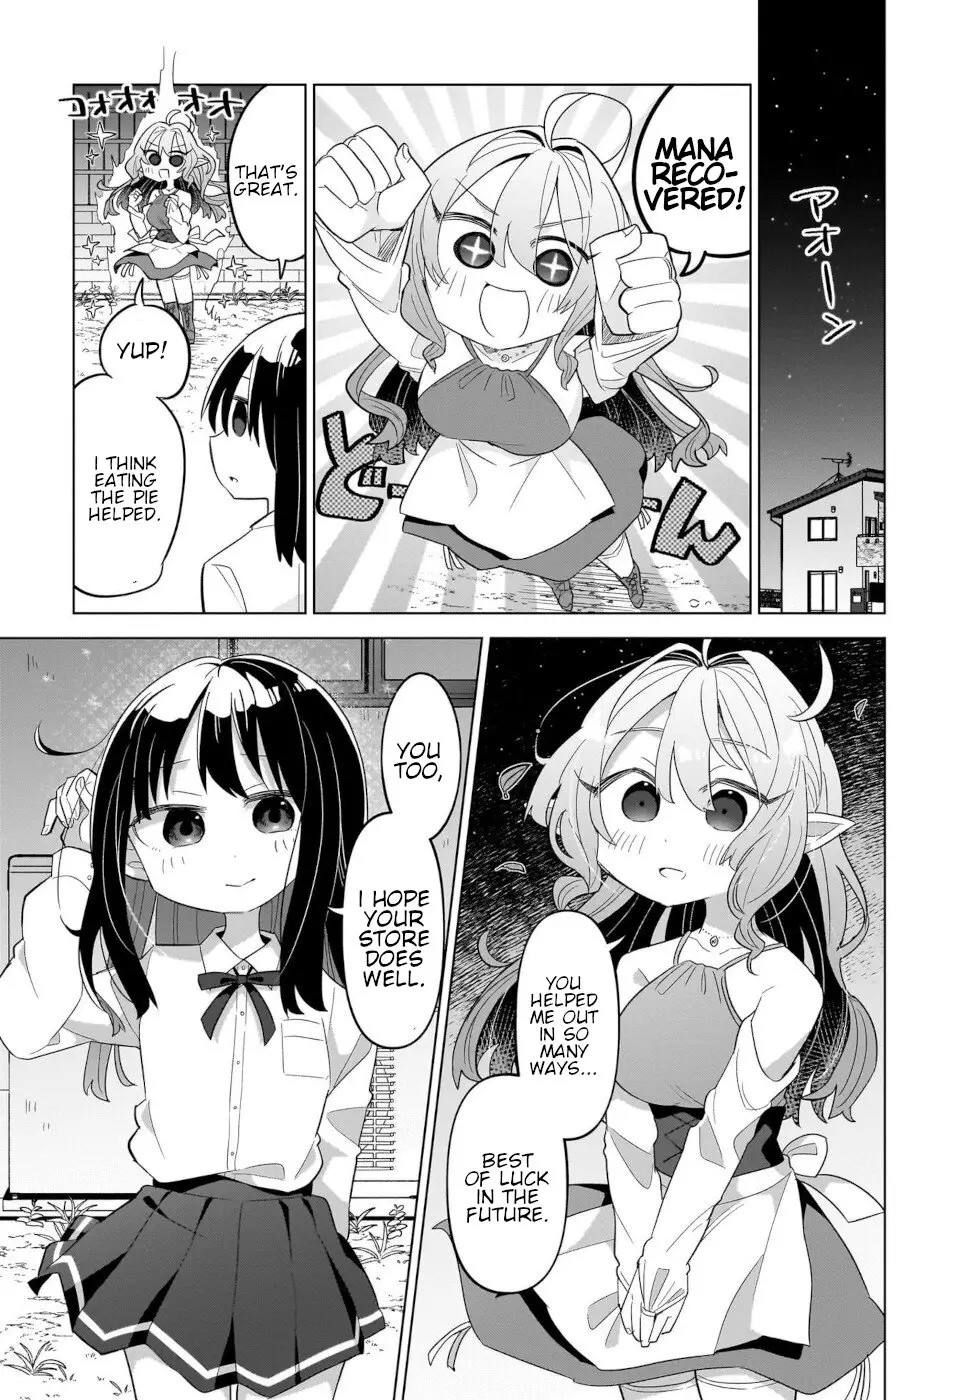 Sweets, Elf, And A High School Girl - 1 page 30-f1c535b5